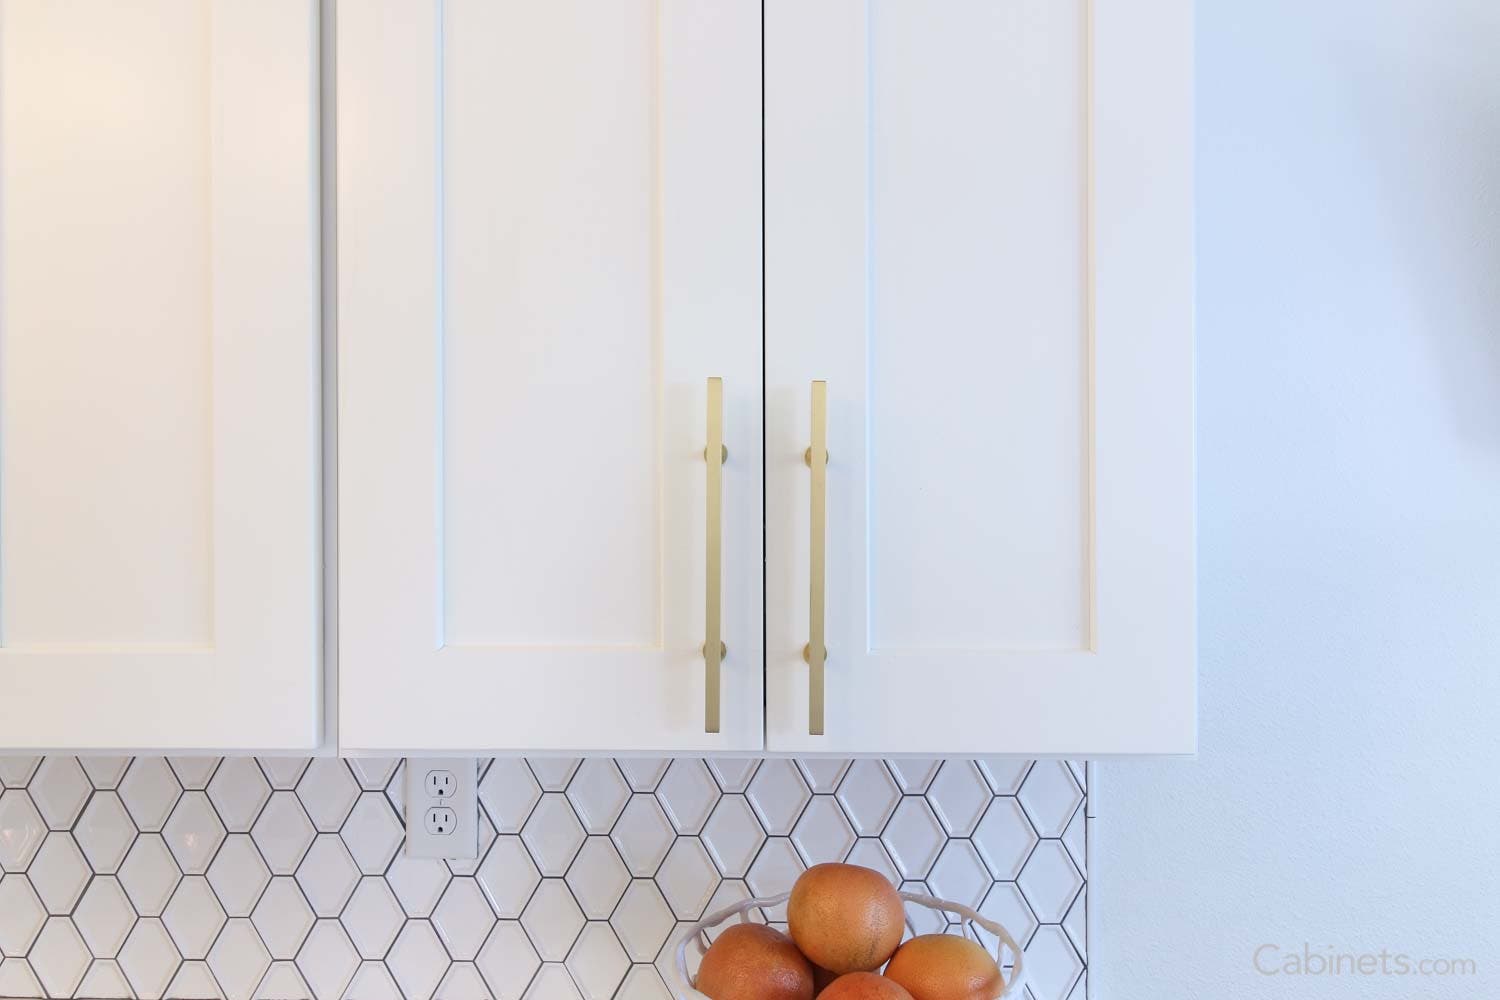 how to install kitchen cabinet handles